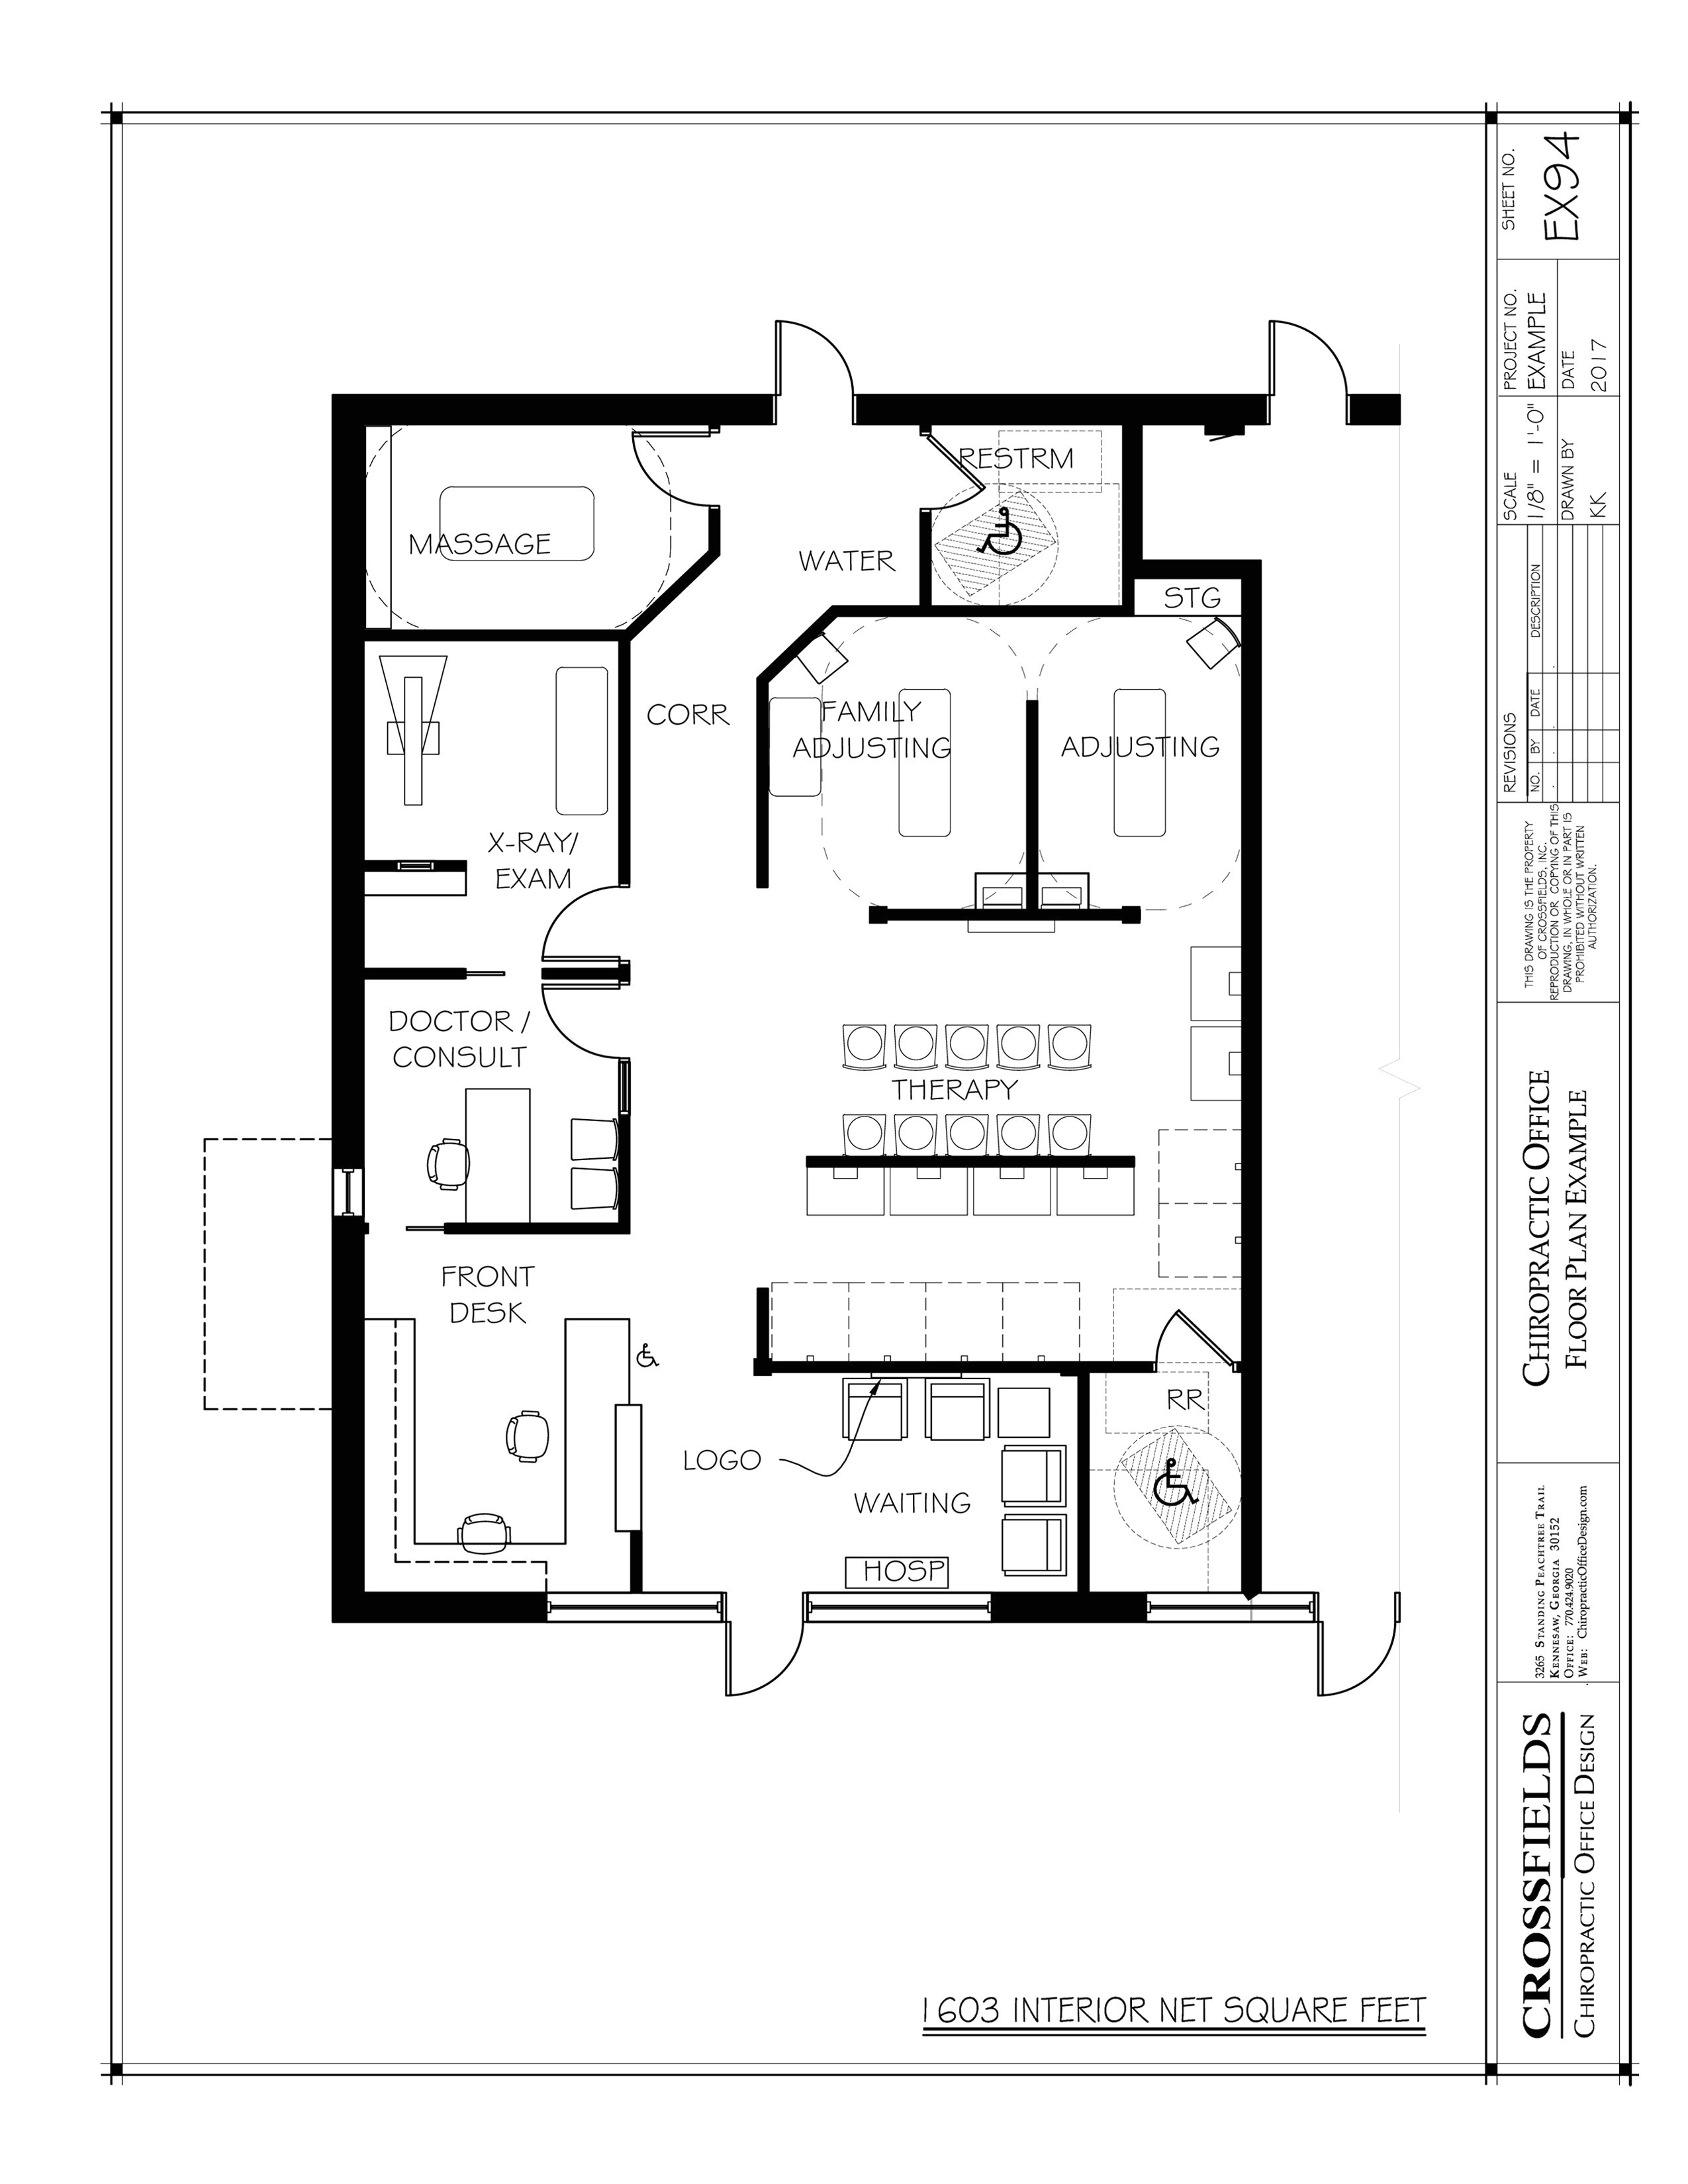 House Floor Plans by Lot Size Floor Plan Size Lovely House Plans by Lot Size Beautiful